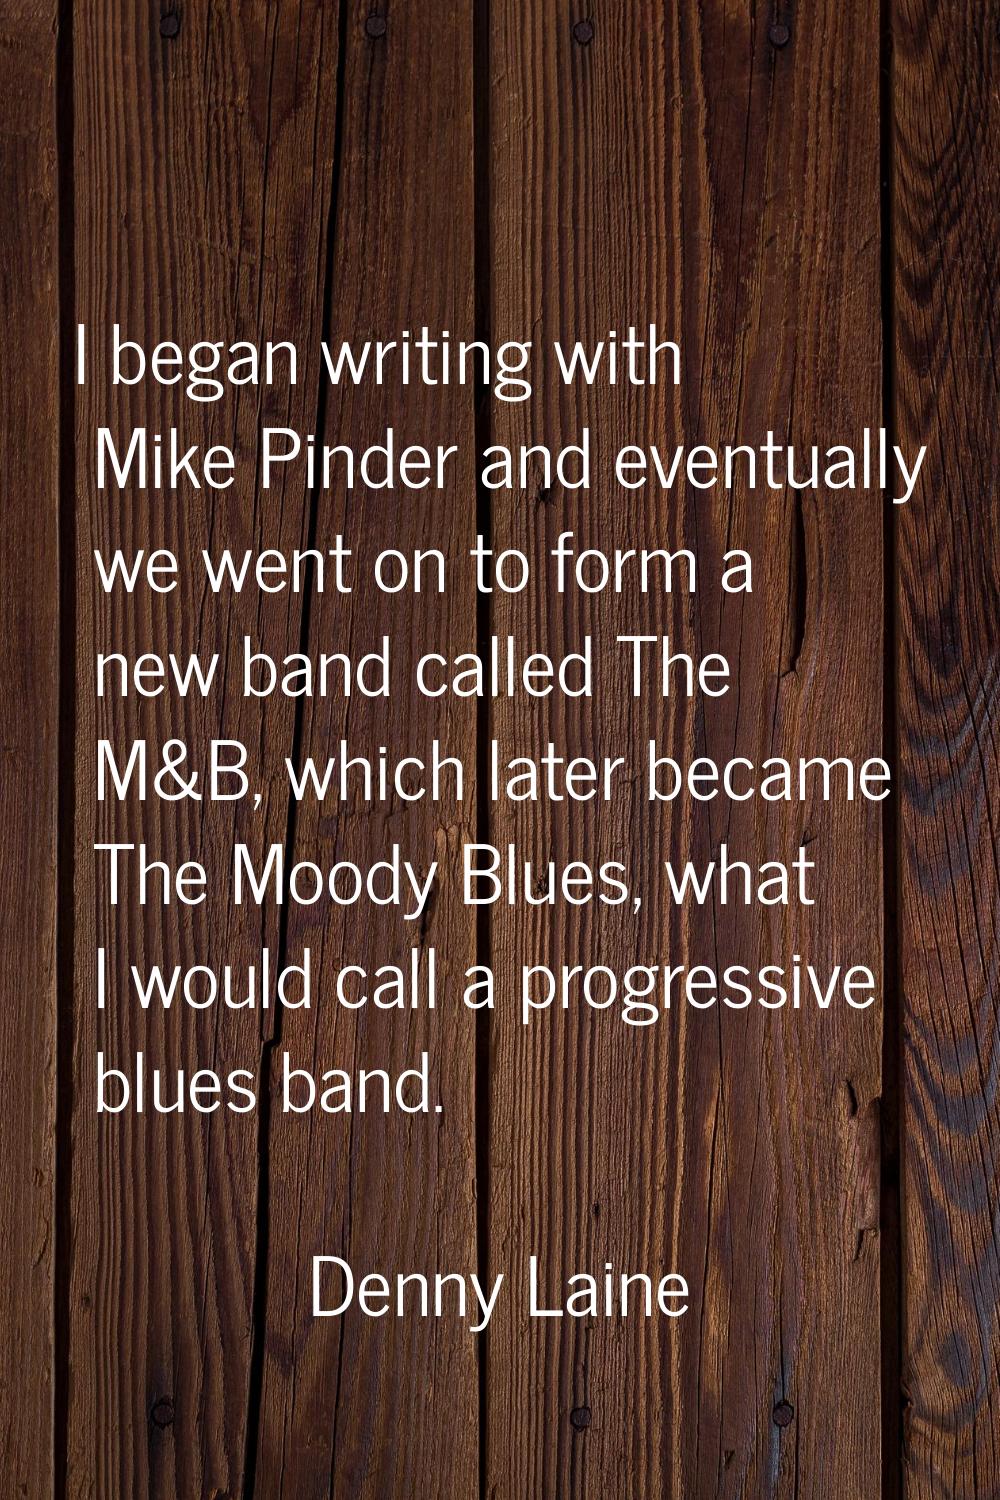 I began writing with Mike Pinder and eventually we went on to form a new band called The M&B, which